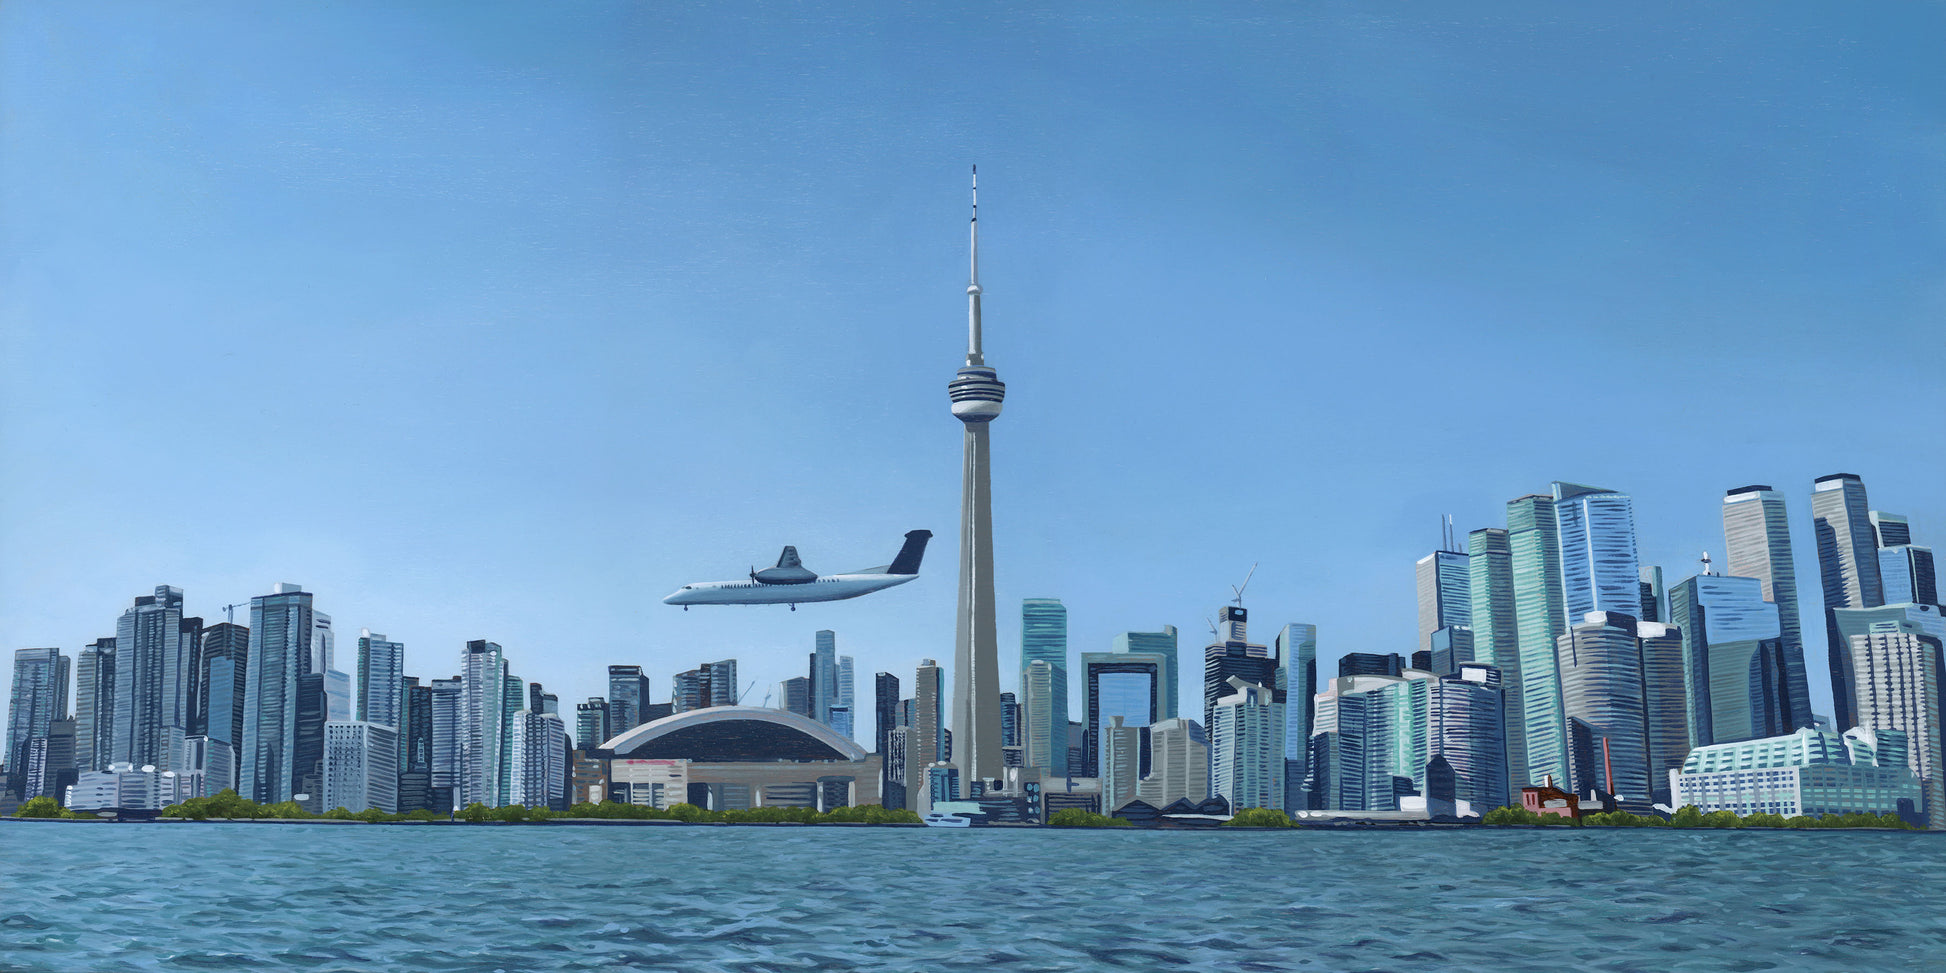 The original painting “Descent Into Toronto" by Hannah Kilby from Hannah Michelle Studios.